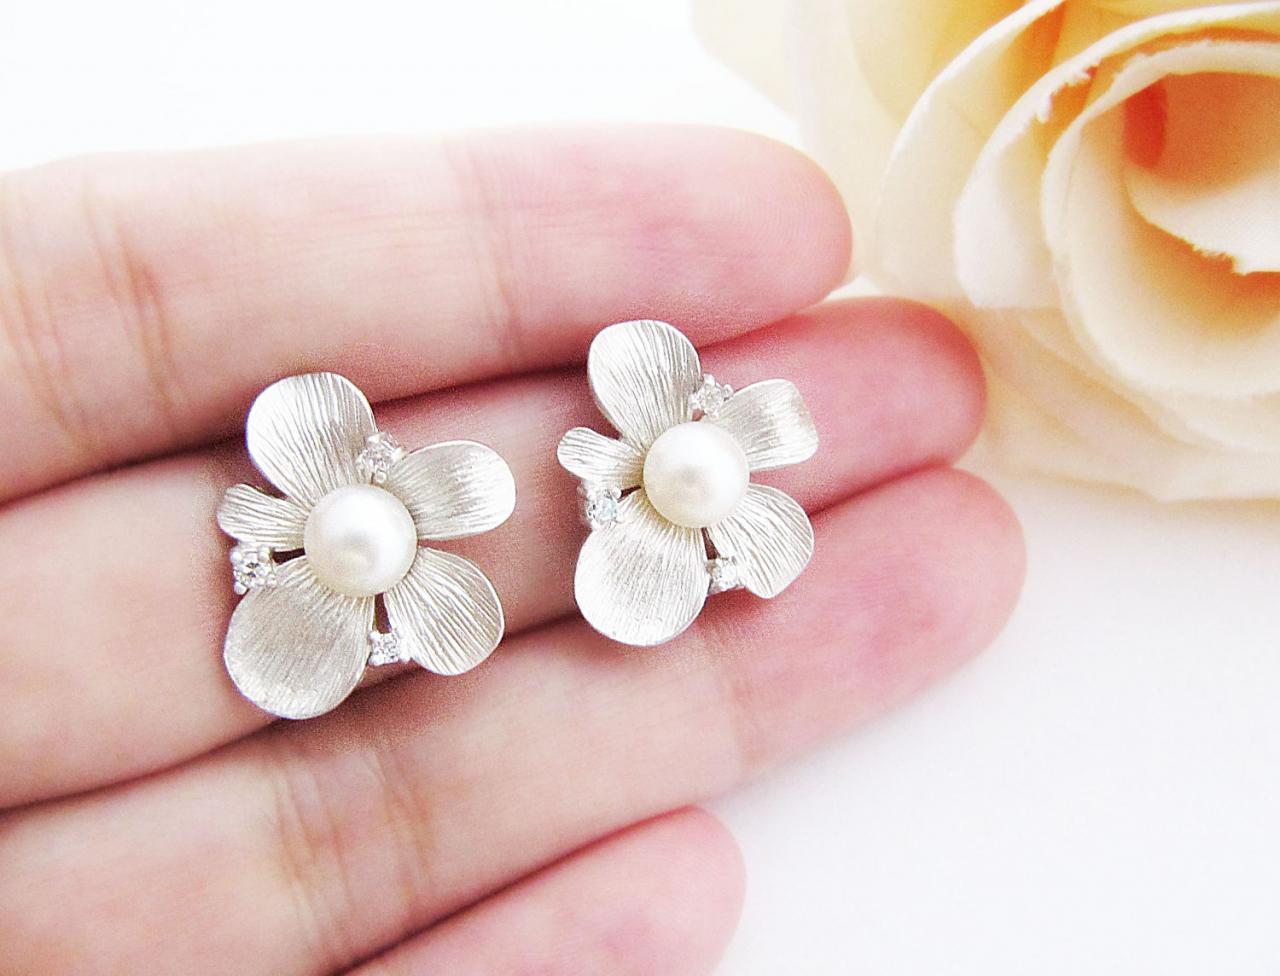 Bridal Earrings Bridesmaid Earrings - Beautiful Matte Silver Flower With Cubic Zirconia Sterling Silver Ear Posts And Freshwater Pearl